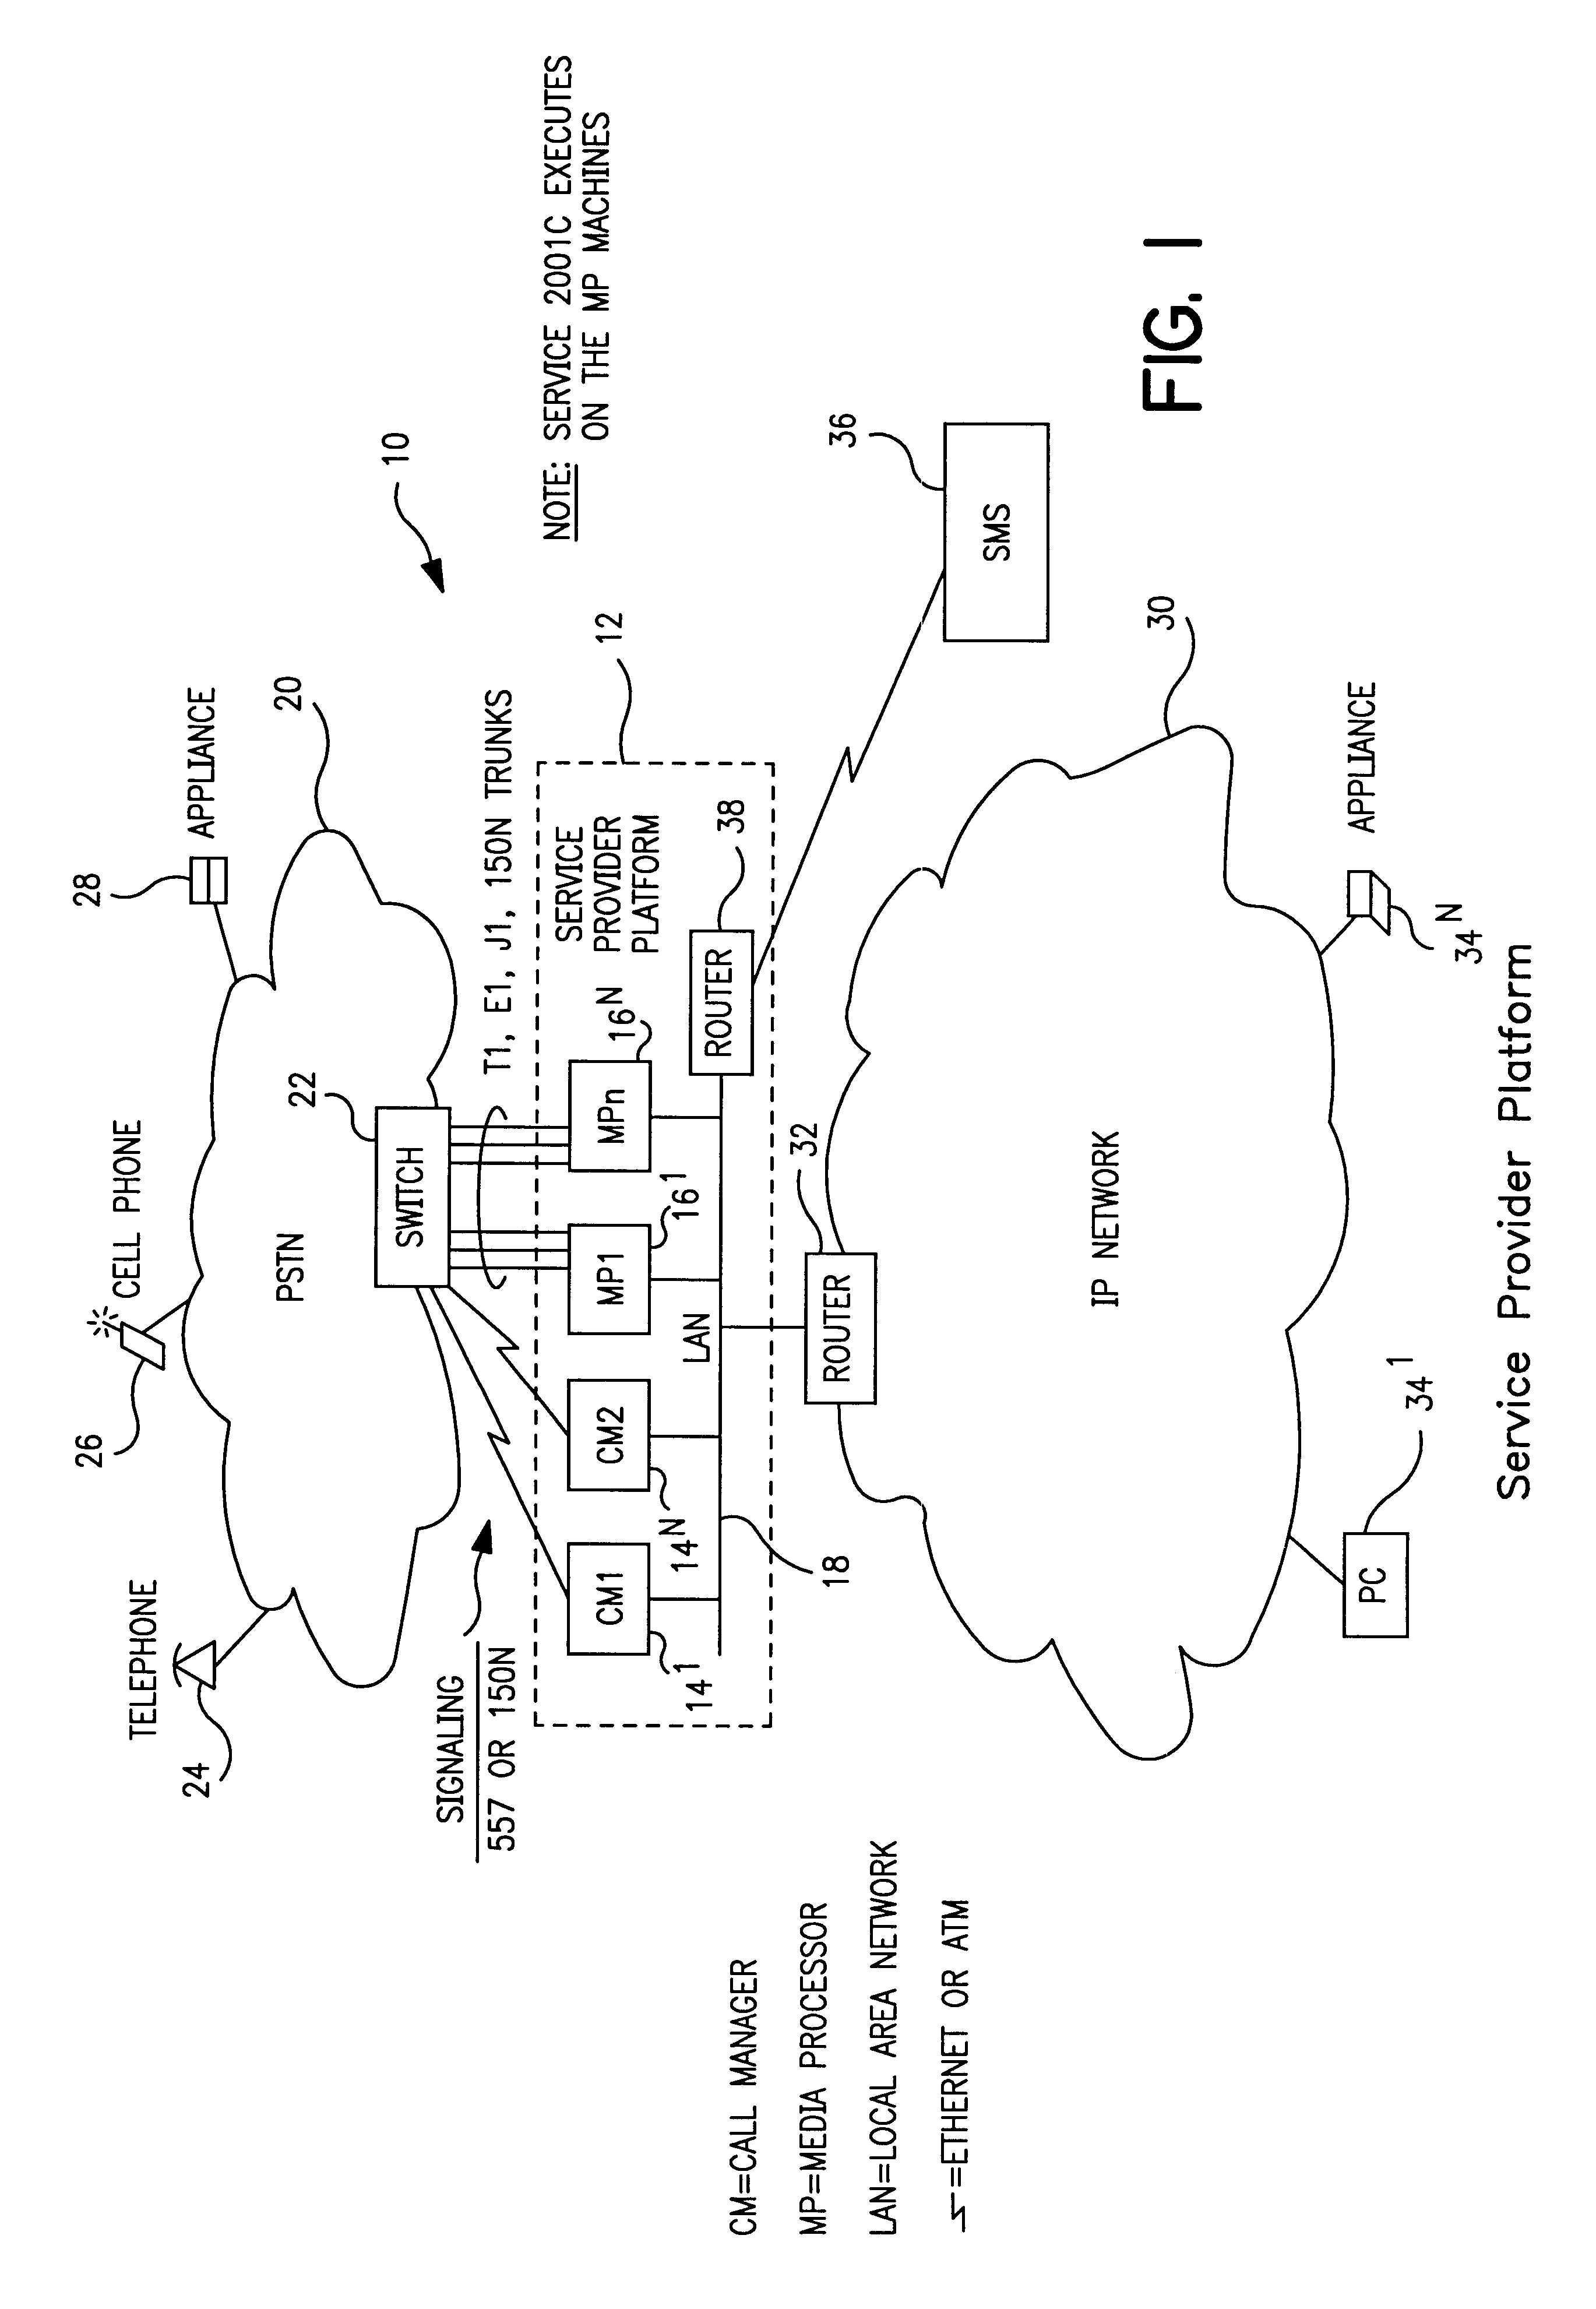 System and method for providing customer personalized and modifiable subscriber services